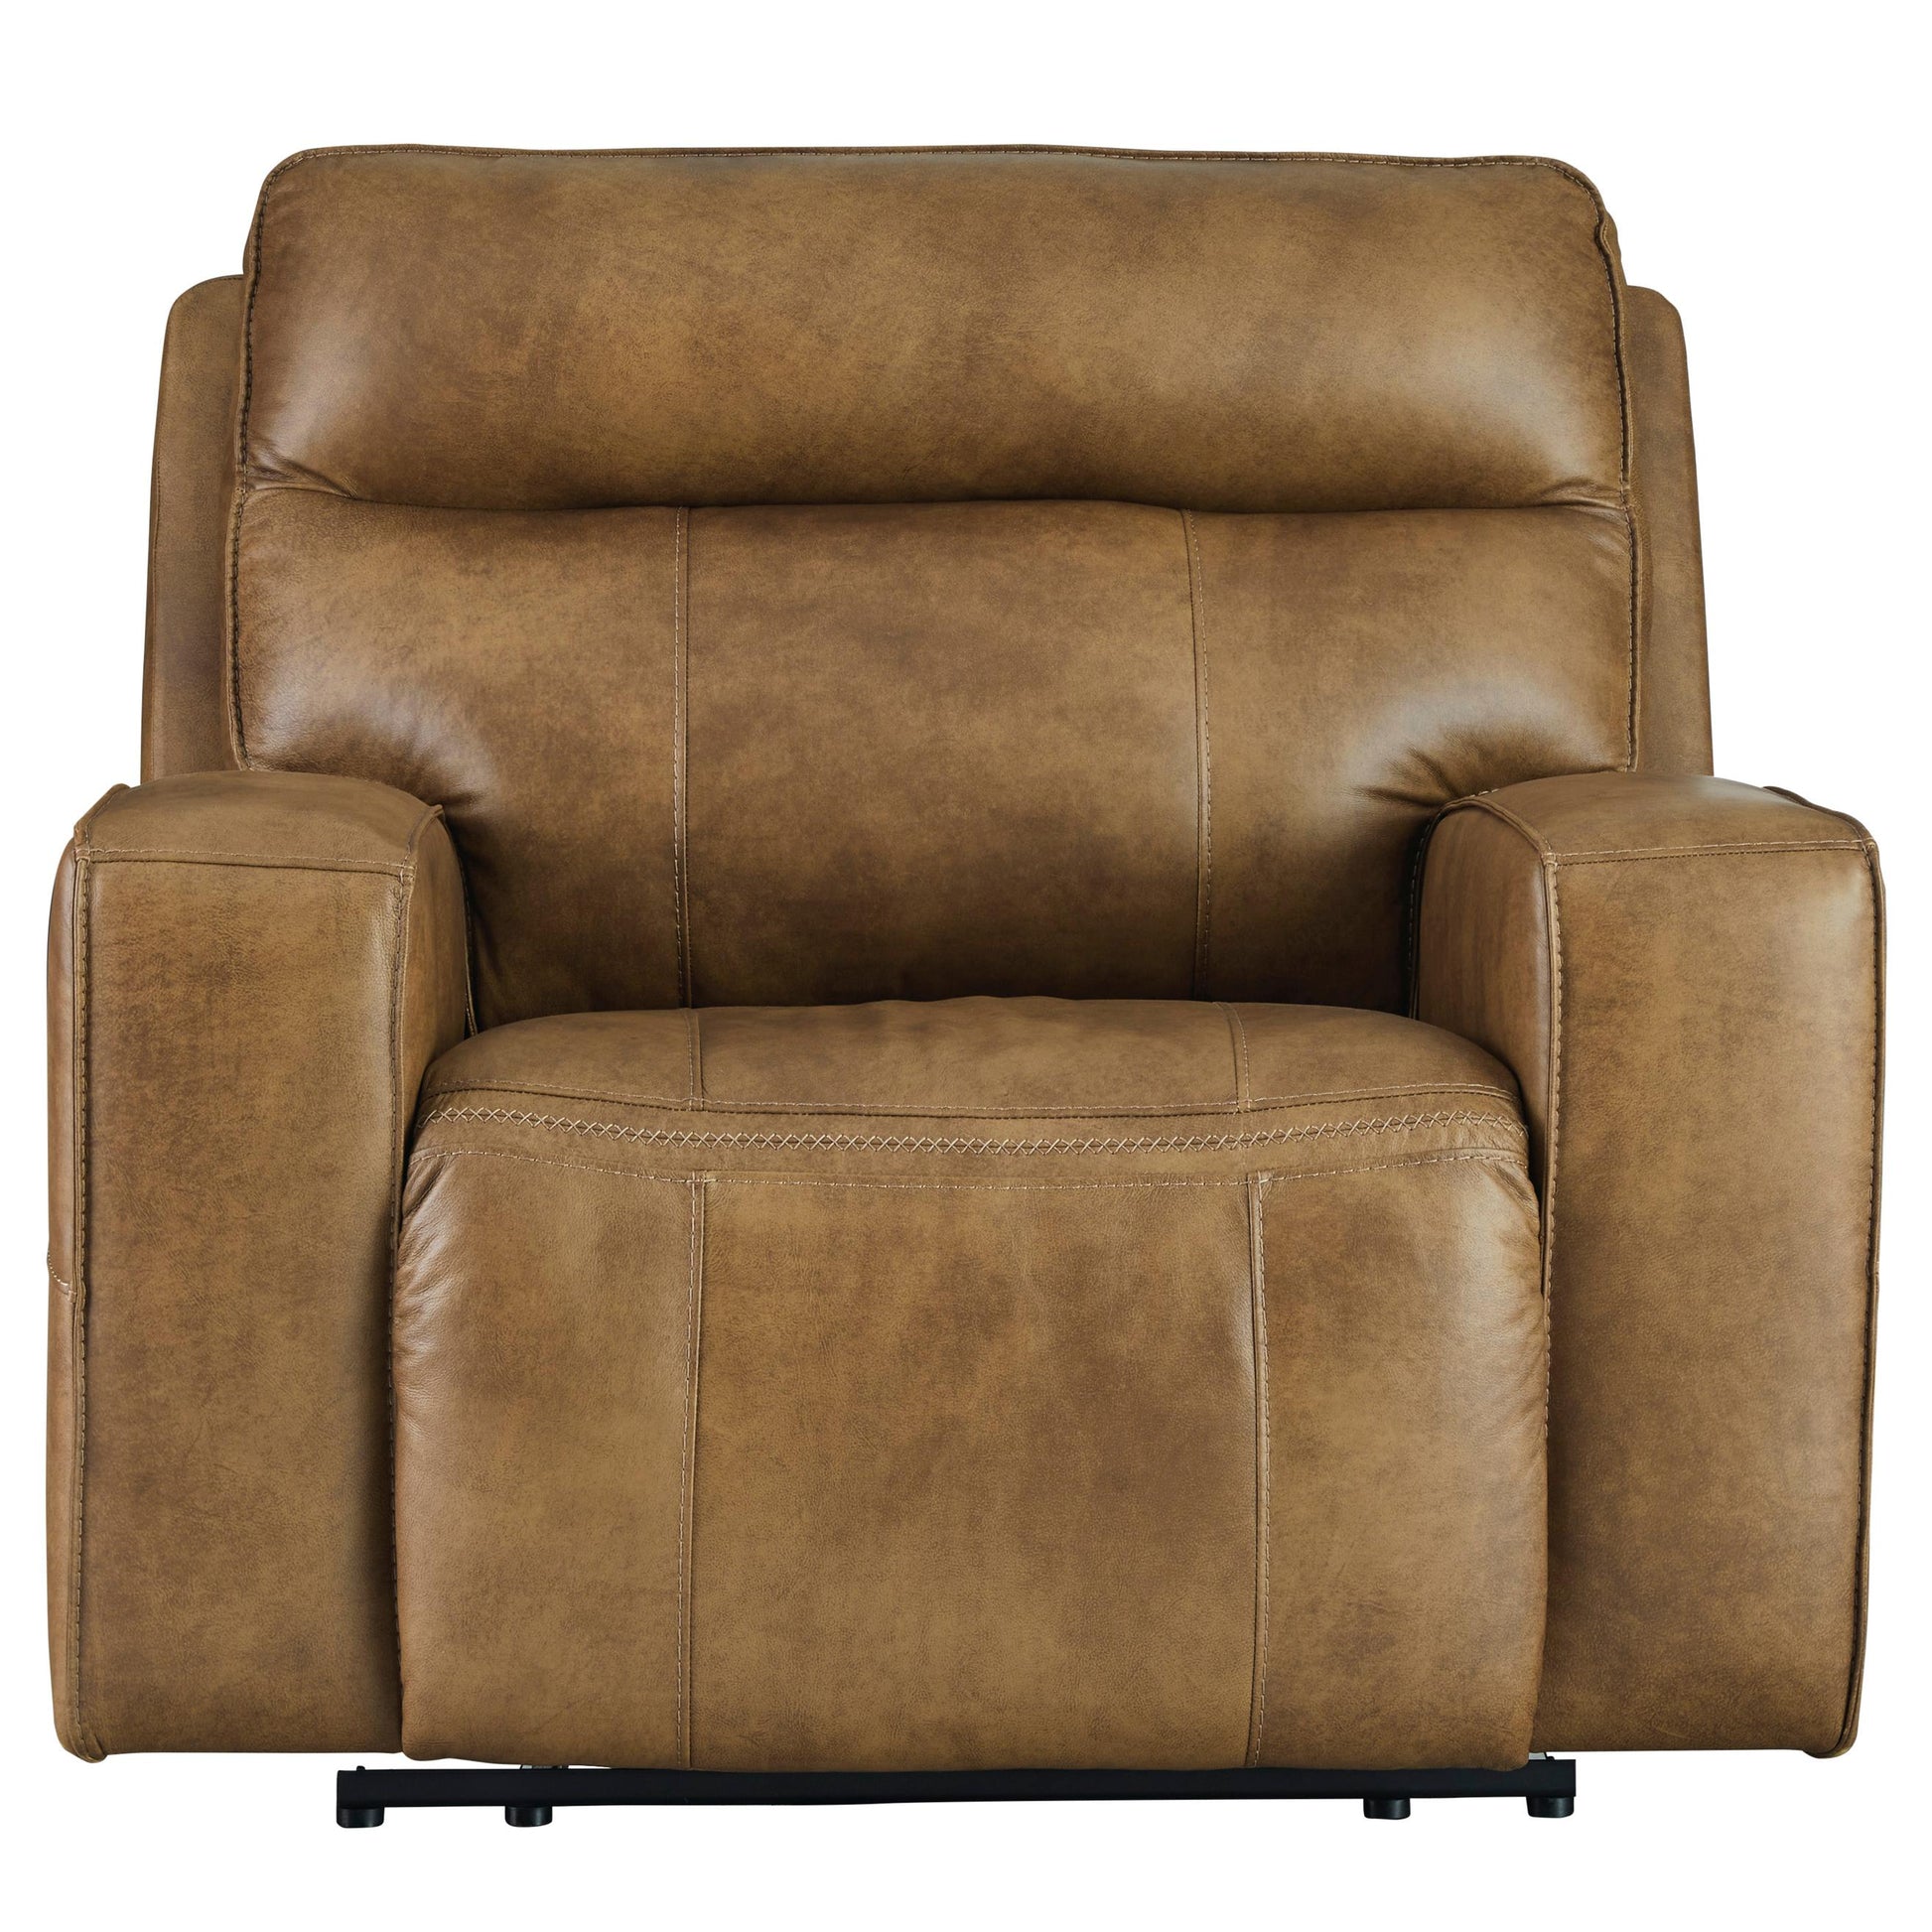 Signature Design by Ashley Game Plan Power Leather Recliner U1520682 IMAGE 3